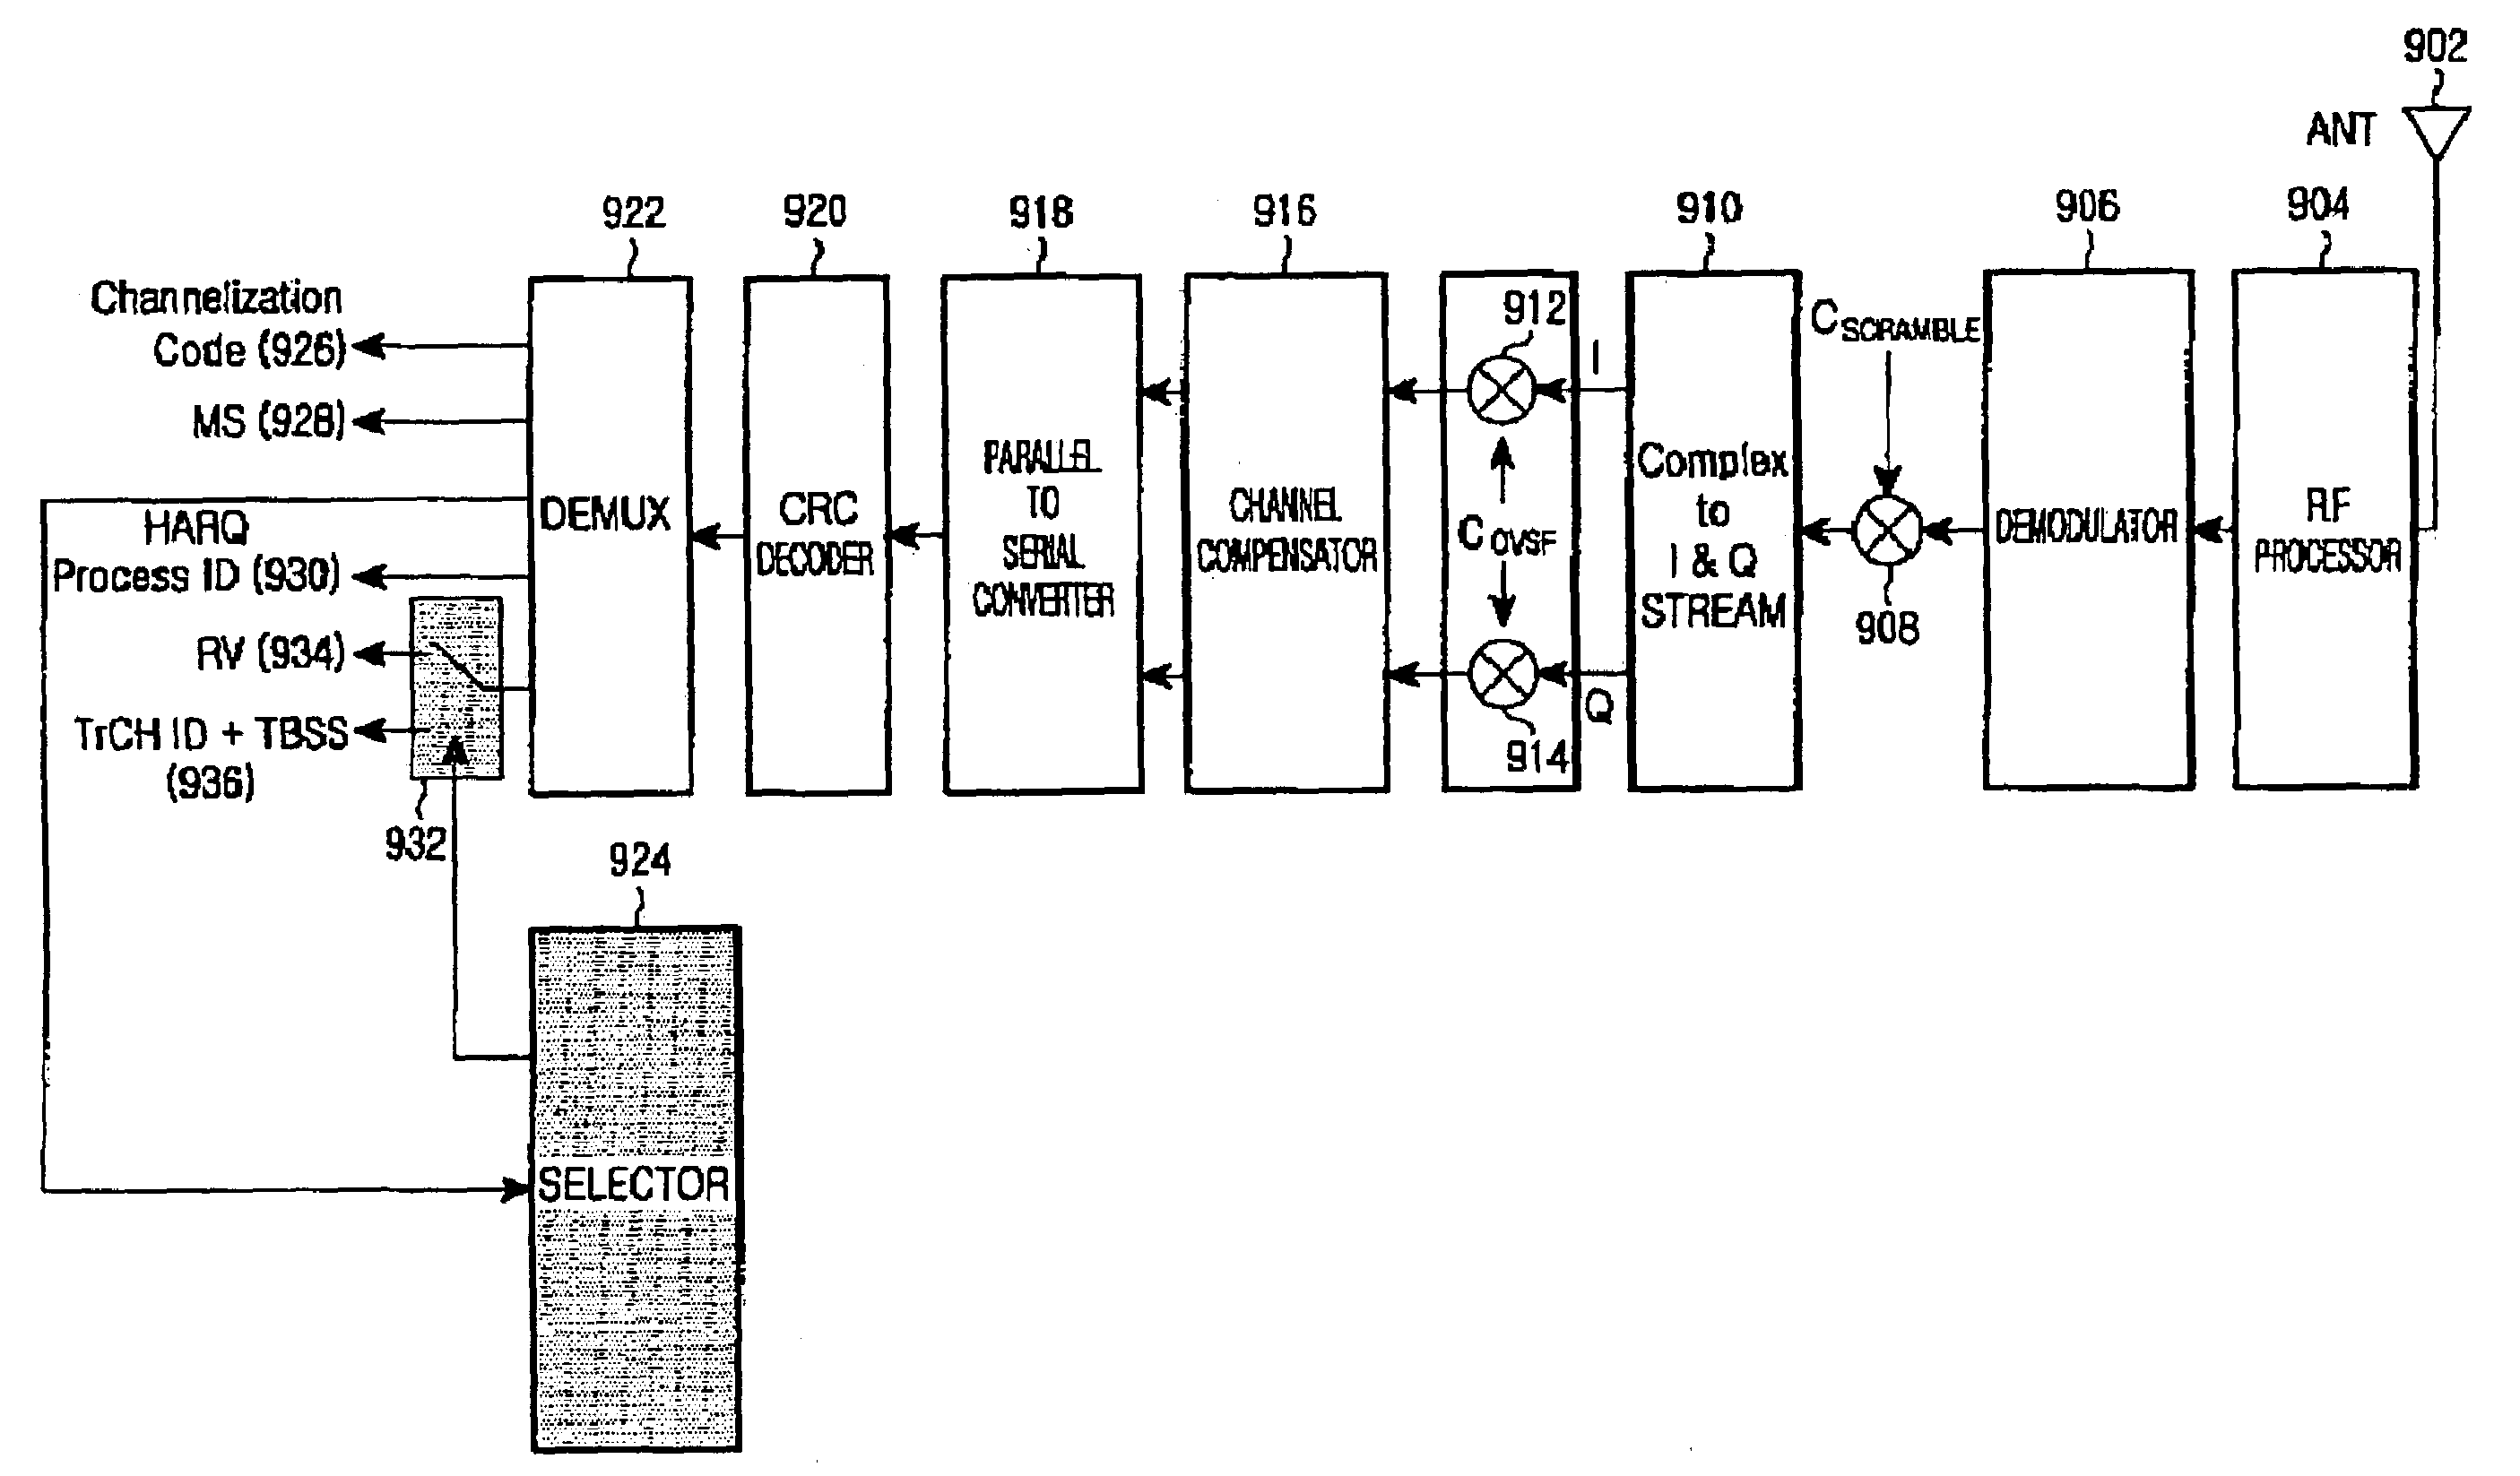 Apparatus and method for transmitting/receiving a high speed-shared control channel in a high speed downlink packet access communication system